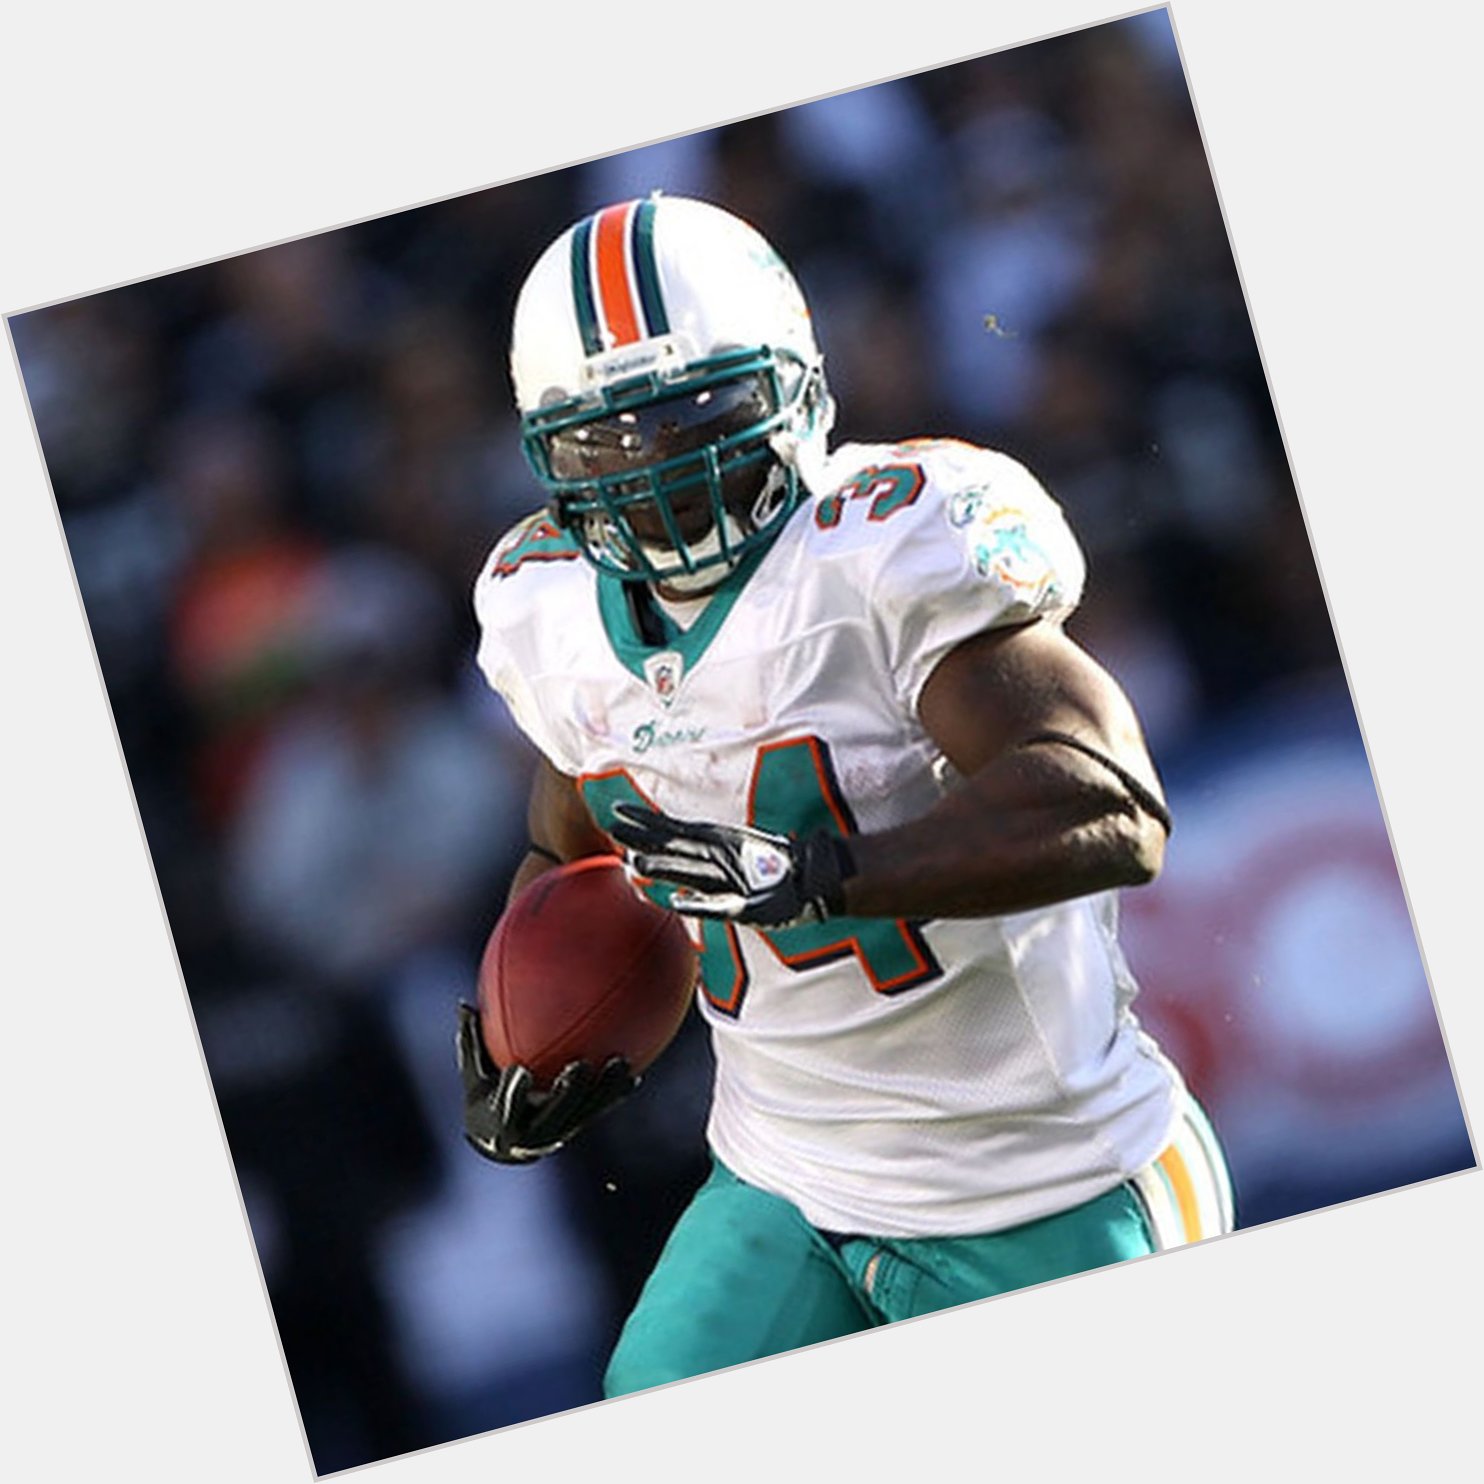 Happy 44th birthday to former RB Ricky Williams  